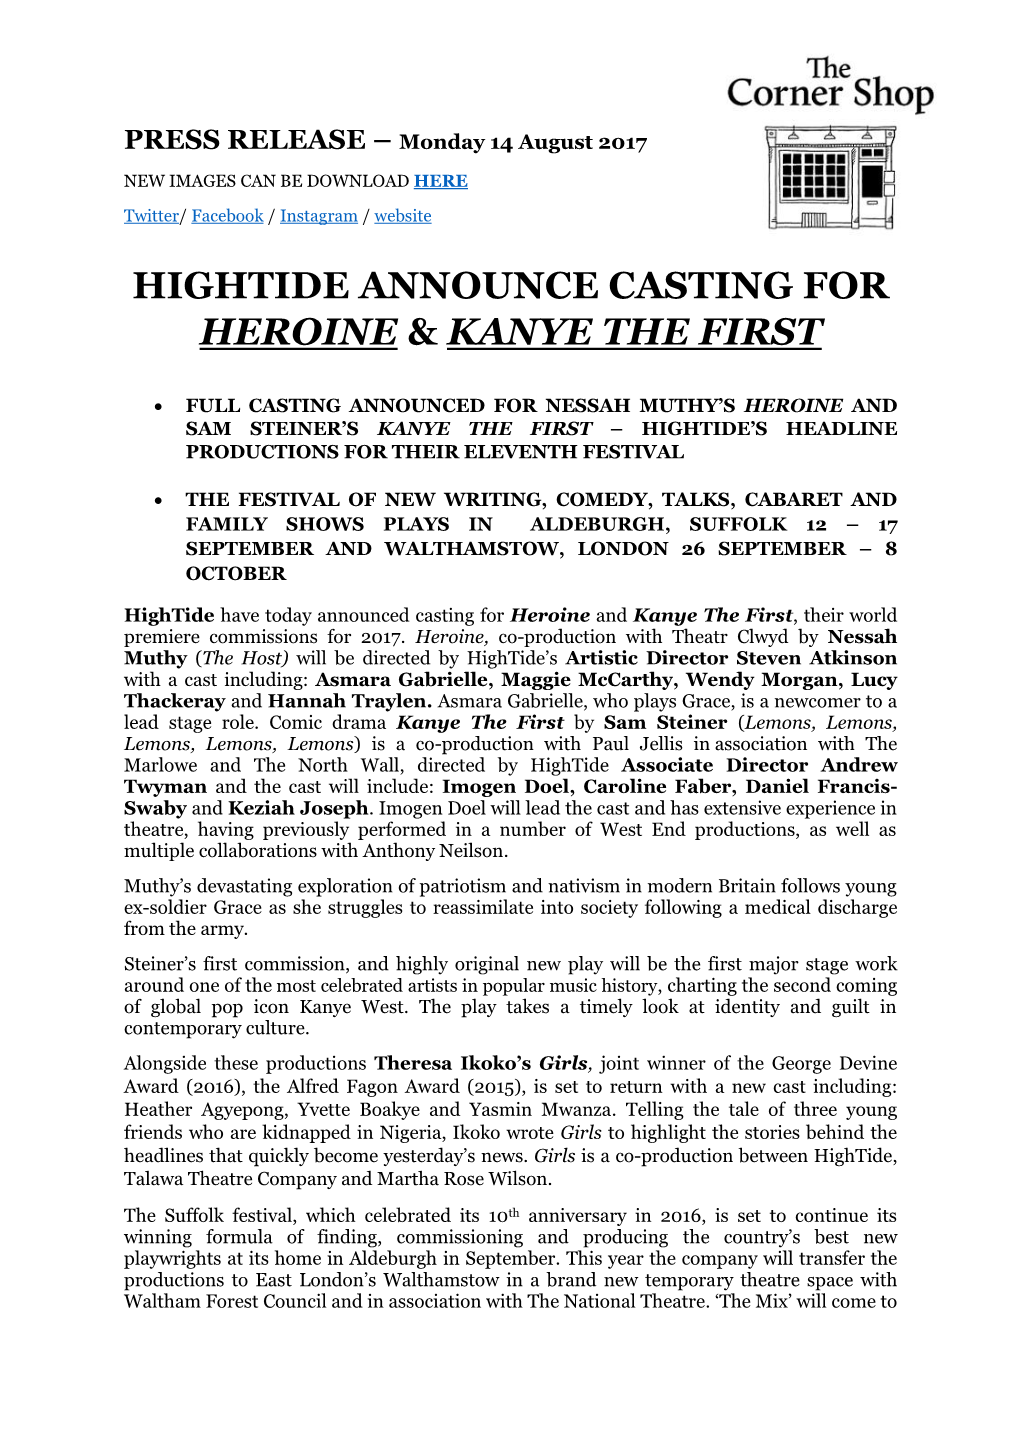 Hightide Announce Casting for Heroine & Kanye the First